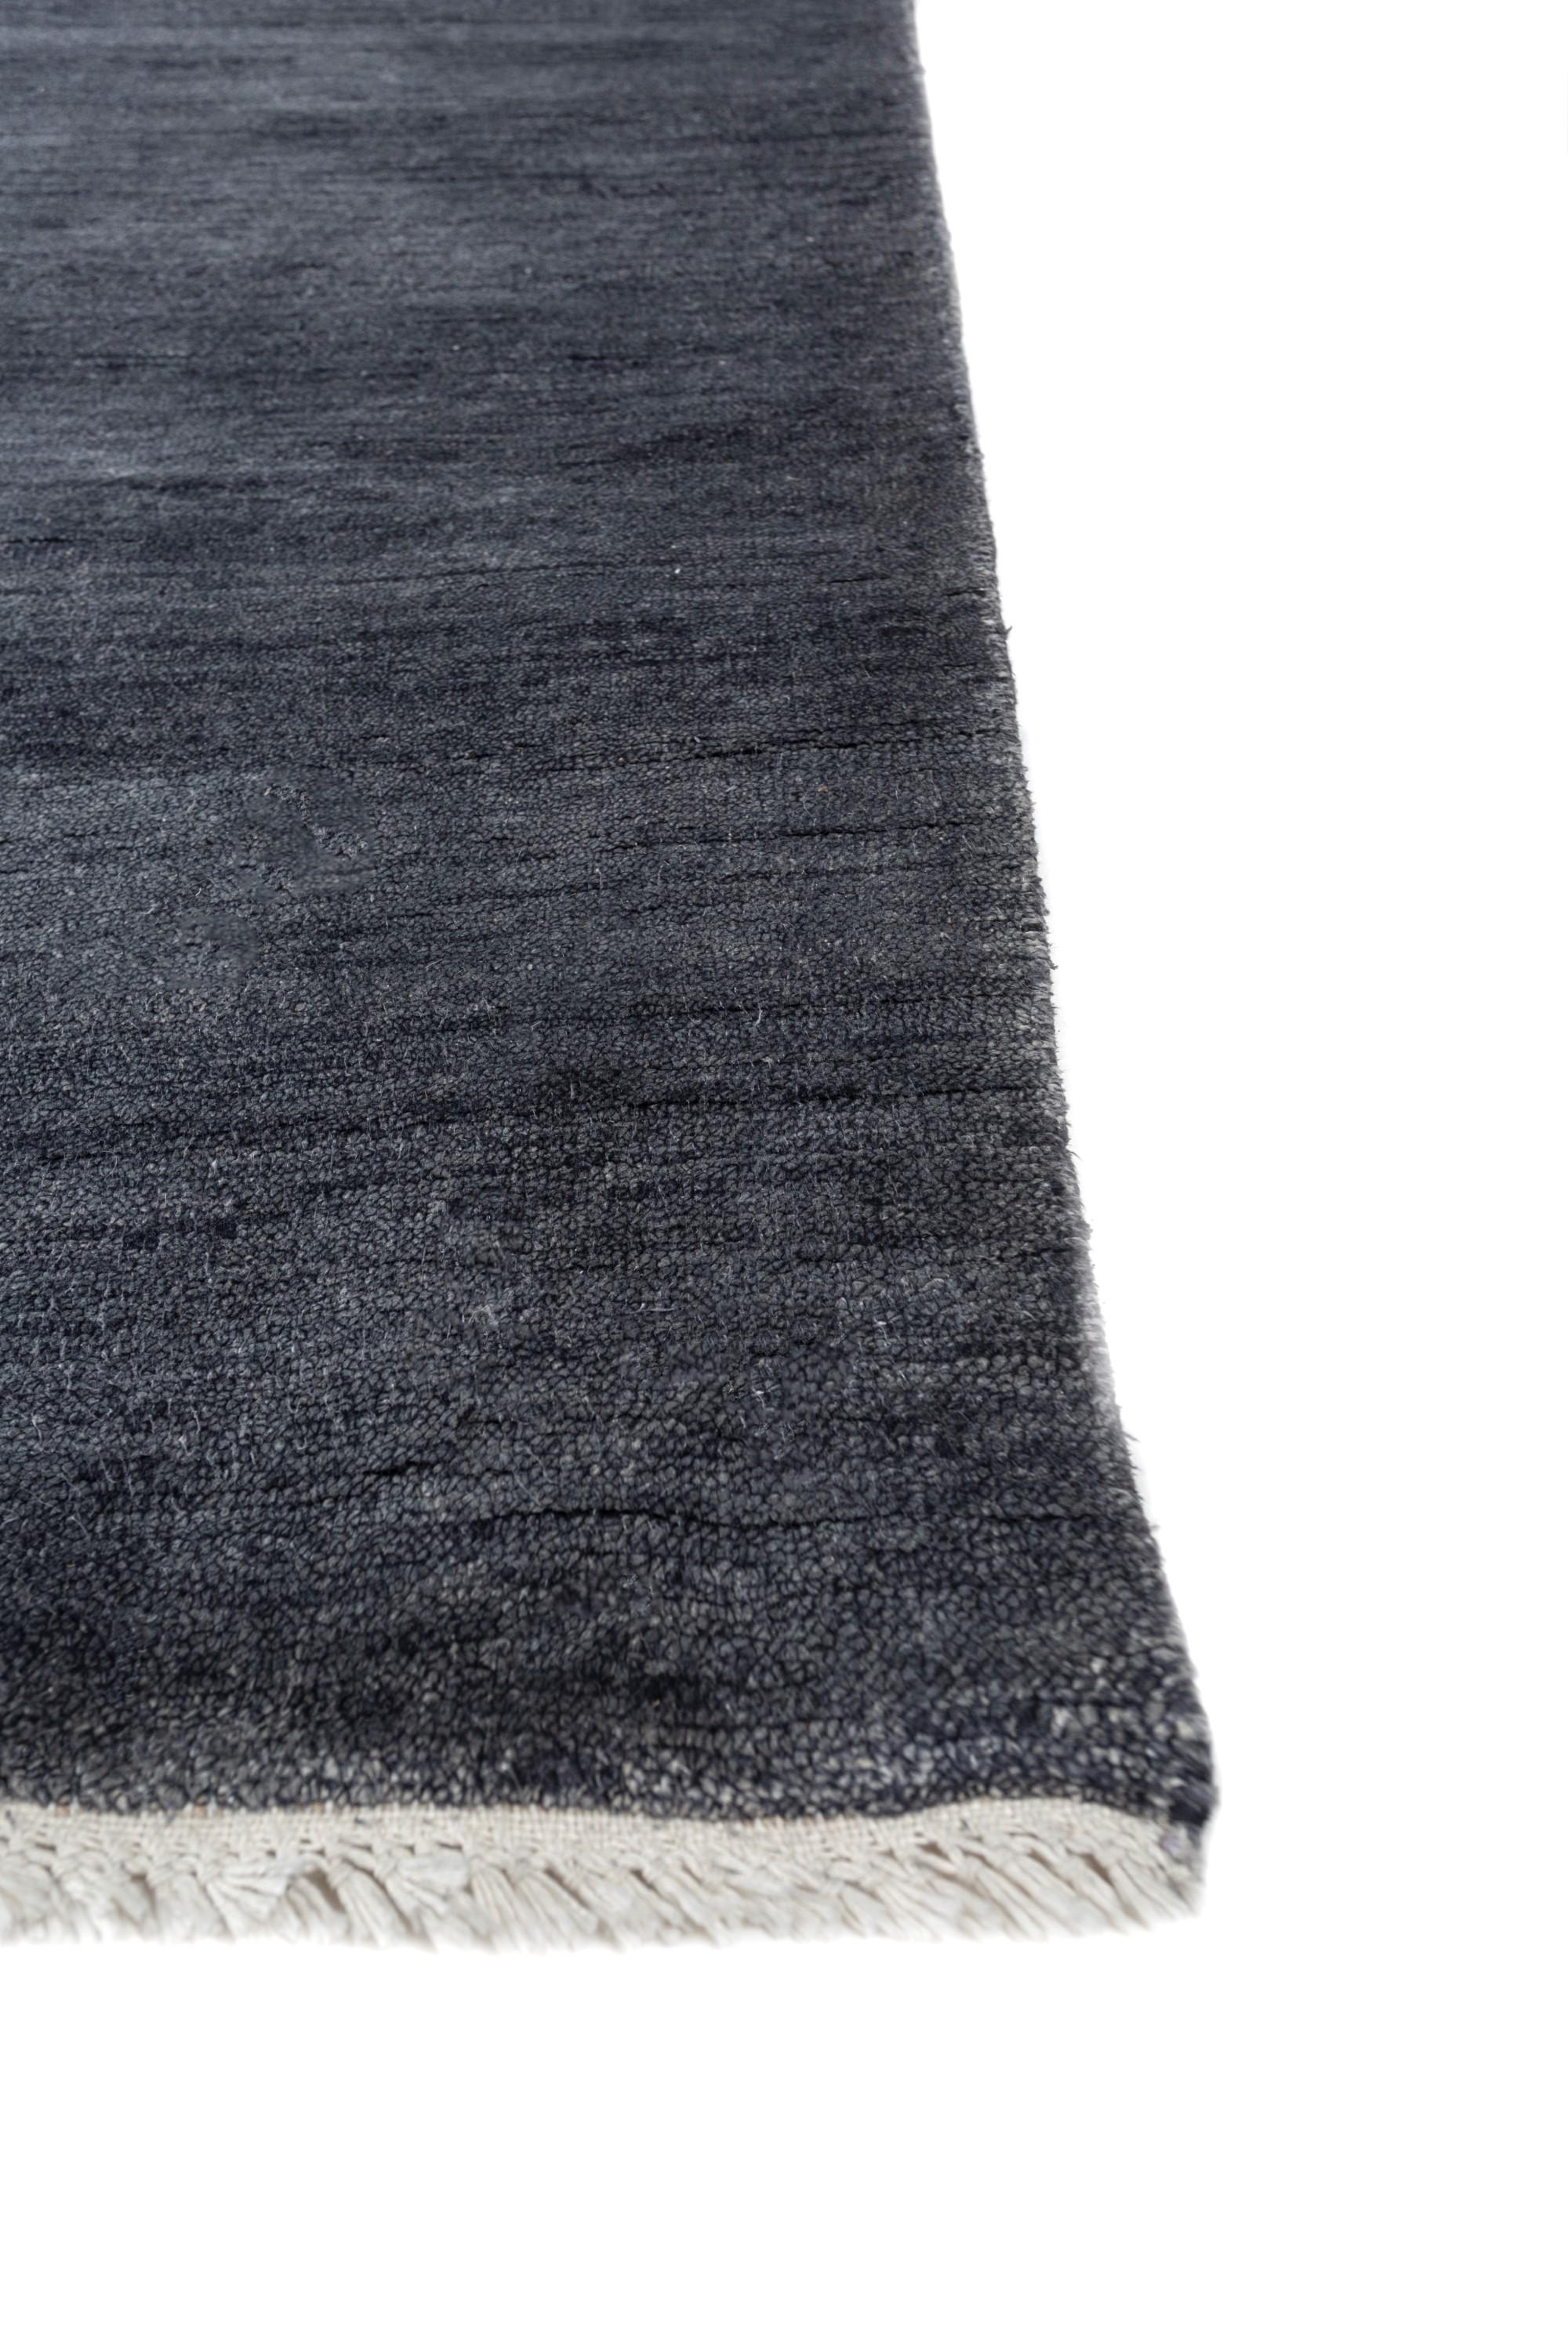 Dive into the mesmerizing allure of this luxury rug from our Manifest collection. Imagine the deep, rich hues of marine blue creating a gradient of flowy serenity, evoking the calmness of the open sea right in the heart of your home. One can find